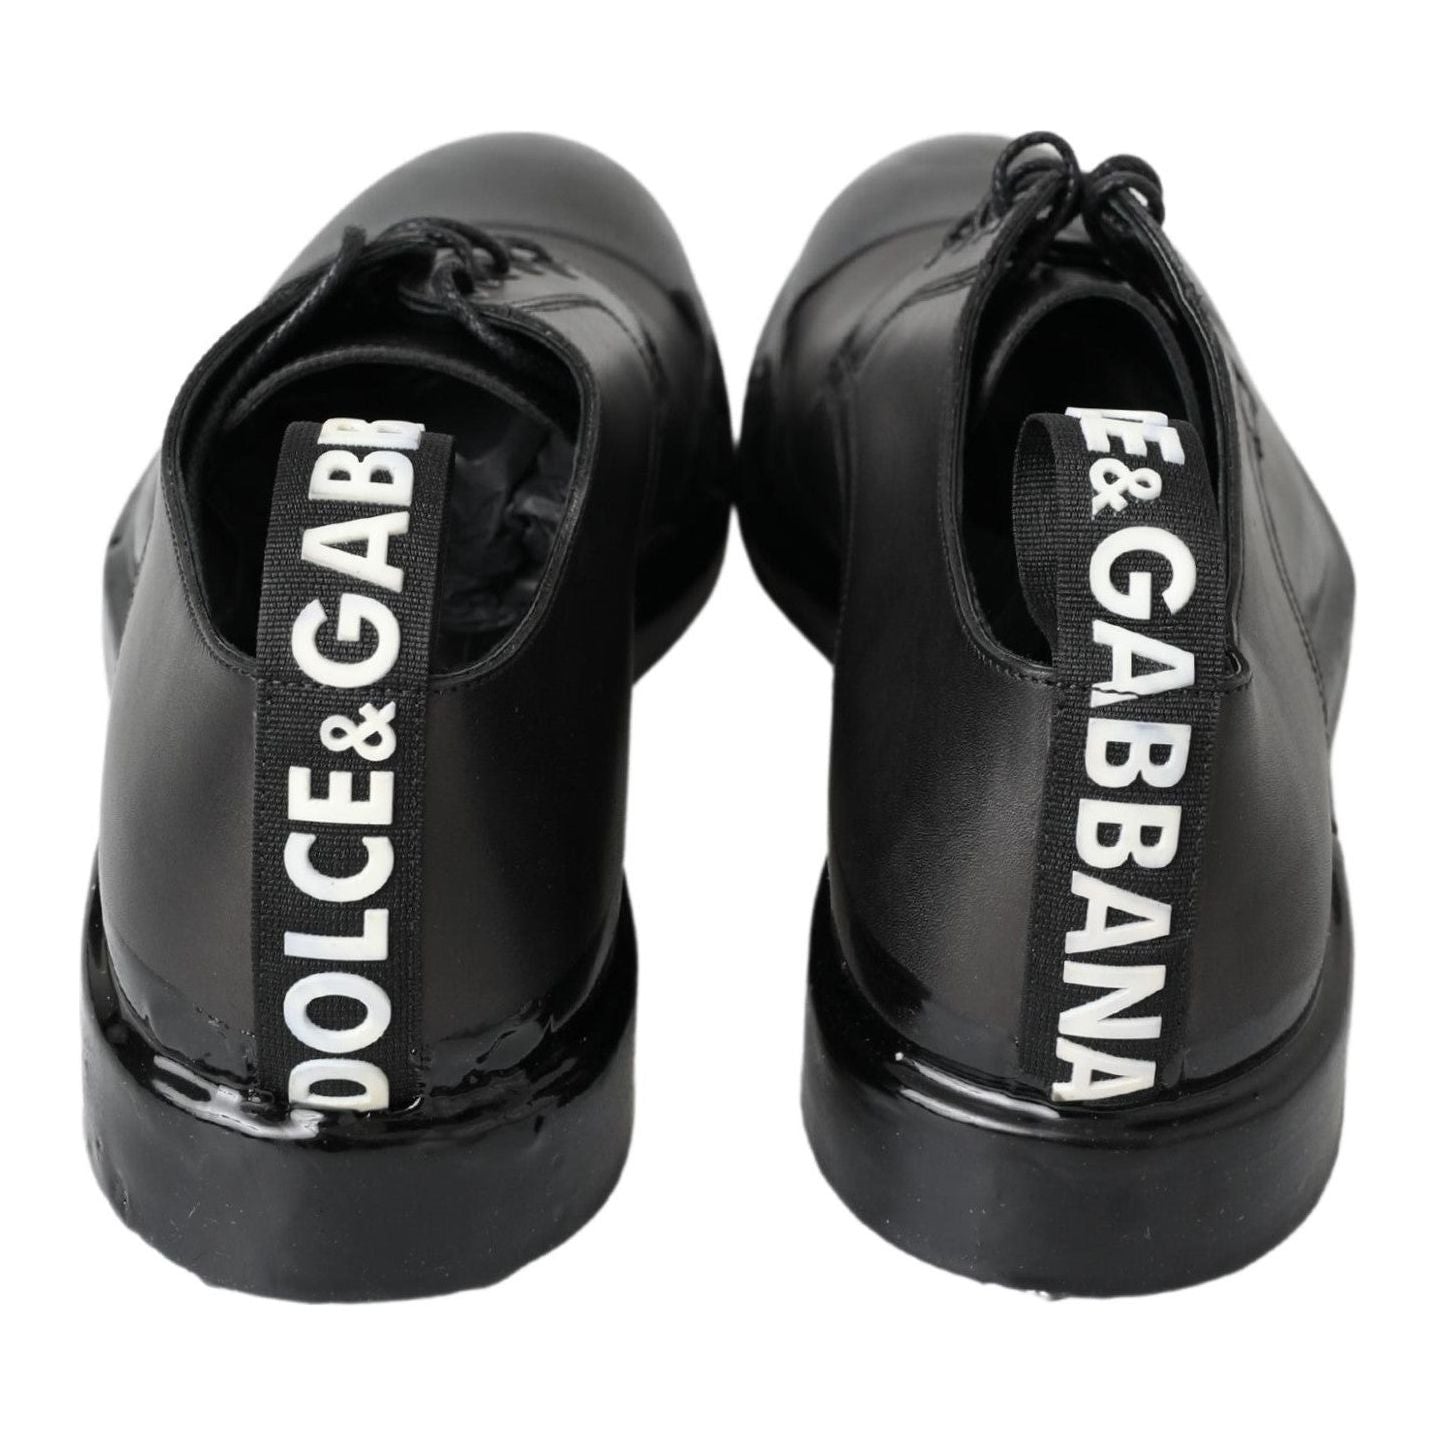 Dolce & Gabbana Elegant Derby Lace-Up Leather Shoes in Black black-leather-derby-dress-shoes